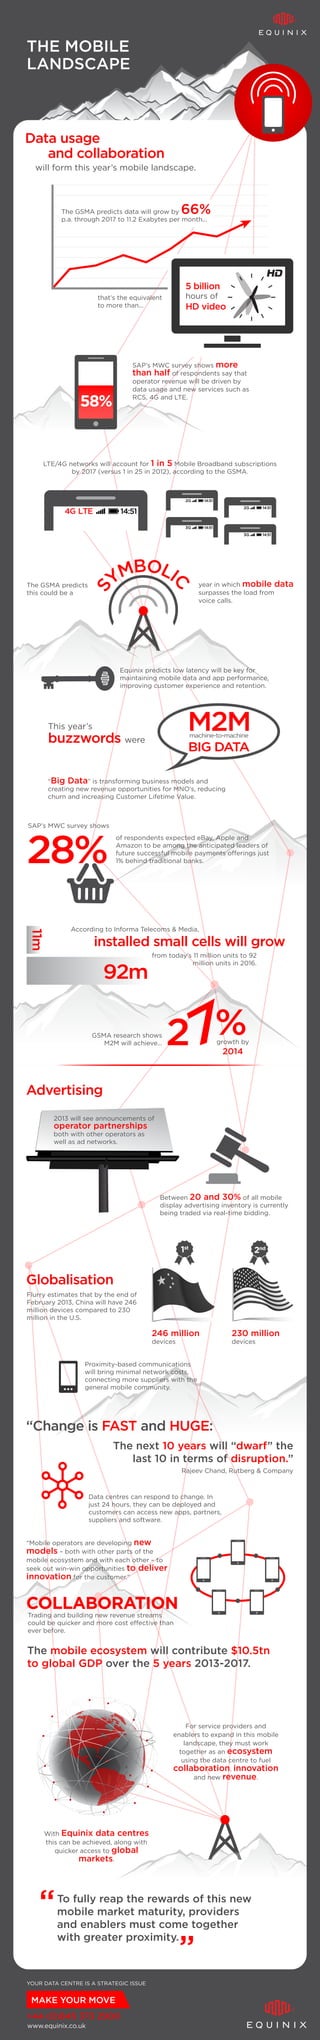 YOUR DATA CENTRE IS A STRATEGIC ISSUE
MAKE YOUR MOVE
+44 (0)845 373 2900
www.equinix.co.uk
58%
S
YMBOLI
C
92m
11m
The GSMA predicts data will grow by 66%
p.a. through 2017 to 11.2 Exabytes per month...
5 billion
hours of
HD video
3G
2G
3G
2G
BIG DATA
machine-to-machine
M2M
1st
2nd
28%
THE MOBILE
LANDSCAPE
will form this year’s mobile landscape.
Data usage
and collaboration
This year’s
SAP’s MWC survey shows more
than half of respondents say that
operator revenue will be driven by
data usage and new services such as
RCS, 4G and LTE.
LTE/4G networks will account for 1 in 5 Mobile Broadband subscriptions
by 2017 (versus 1 in 25 in 2012), according to the GSMA.
The GSMA predicts
this could be a
year in which mobile data
surpasses the load from
voice calls.
growth by
2014
buzzwords were
“Big Data” is transforming business models and
creating new revenue opportunities for MNO’s, reducing
churn and increasing Customer Lifetime Value.
SAP’s MWC survey shows
from today’s 11 million units to 92
million units in 2016.
GSMA research shows
M2M will achieve...
2013 will see announcements of
operator partnerships
both with other operators as
well as ad networks.
246 million
devices
230 million
devices
Advertising
Globalisation
COLLABORATION
Between 20 and 30% of all mobile
display advertising inventory is currently
being traded via real-time bidding.
Flurry estimates that by the end of
February 2013, China will have 246
million devices compared to 230
million in the U.S.
Proximity-based communications
will bring minimal network costs,
connecting more suppliers with the
general mobile community.
Data centres can respond to change. In
just 24 hours, they can be deployed and
customers can access new apps, partners,
suppliers and software.
Trading and building new revenue streams
could be quicker and more cost effective than
ever before.
“Change is FAST and HUGE:
Rajeev Chand, Rutberg & Company
The next 10 years will “dwarf” the
last 10 in terms of disruption.”
“Mobile operators are developing new
models – both with other parts of the
mobile ecosystem and with each other – to
seek out win-win opportunities to deliver
innovation for the customer.”
The mobile ecosystem will contribute $10.5tn
to global GDP over the 5 years 2013-2017.
To fully reap the rewards of this new
mobile market maturity, providers
and enablers must come together
with greater proximity.
“
”
For service providers and
enablers to expand in this mobile
landscape, they must work
together as an ecosystem
using the data centre to fuel
collaboration, innovation
and new revenue.
With Equinix data centres
this can be achieved, along with
quicker access to global
markets.
installed small cells will grow
According to Informa Telecoms & Media,
that’s the equivalent
to more than...
of respondents expected eBay, Apple and
Amazon to be among the anticipated leaders of
future successful mobile payments offerings just
1% behind traditional banks.
Equinix predicts low latency will be key for
maintaining mobile data and app performance,
improving customer experience and retention.
 